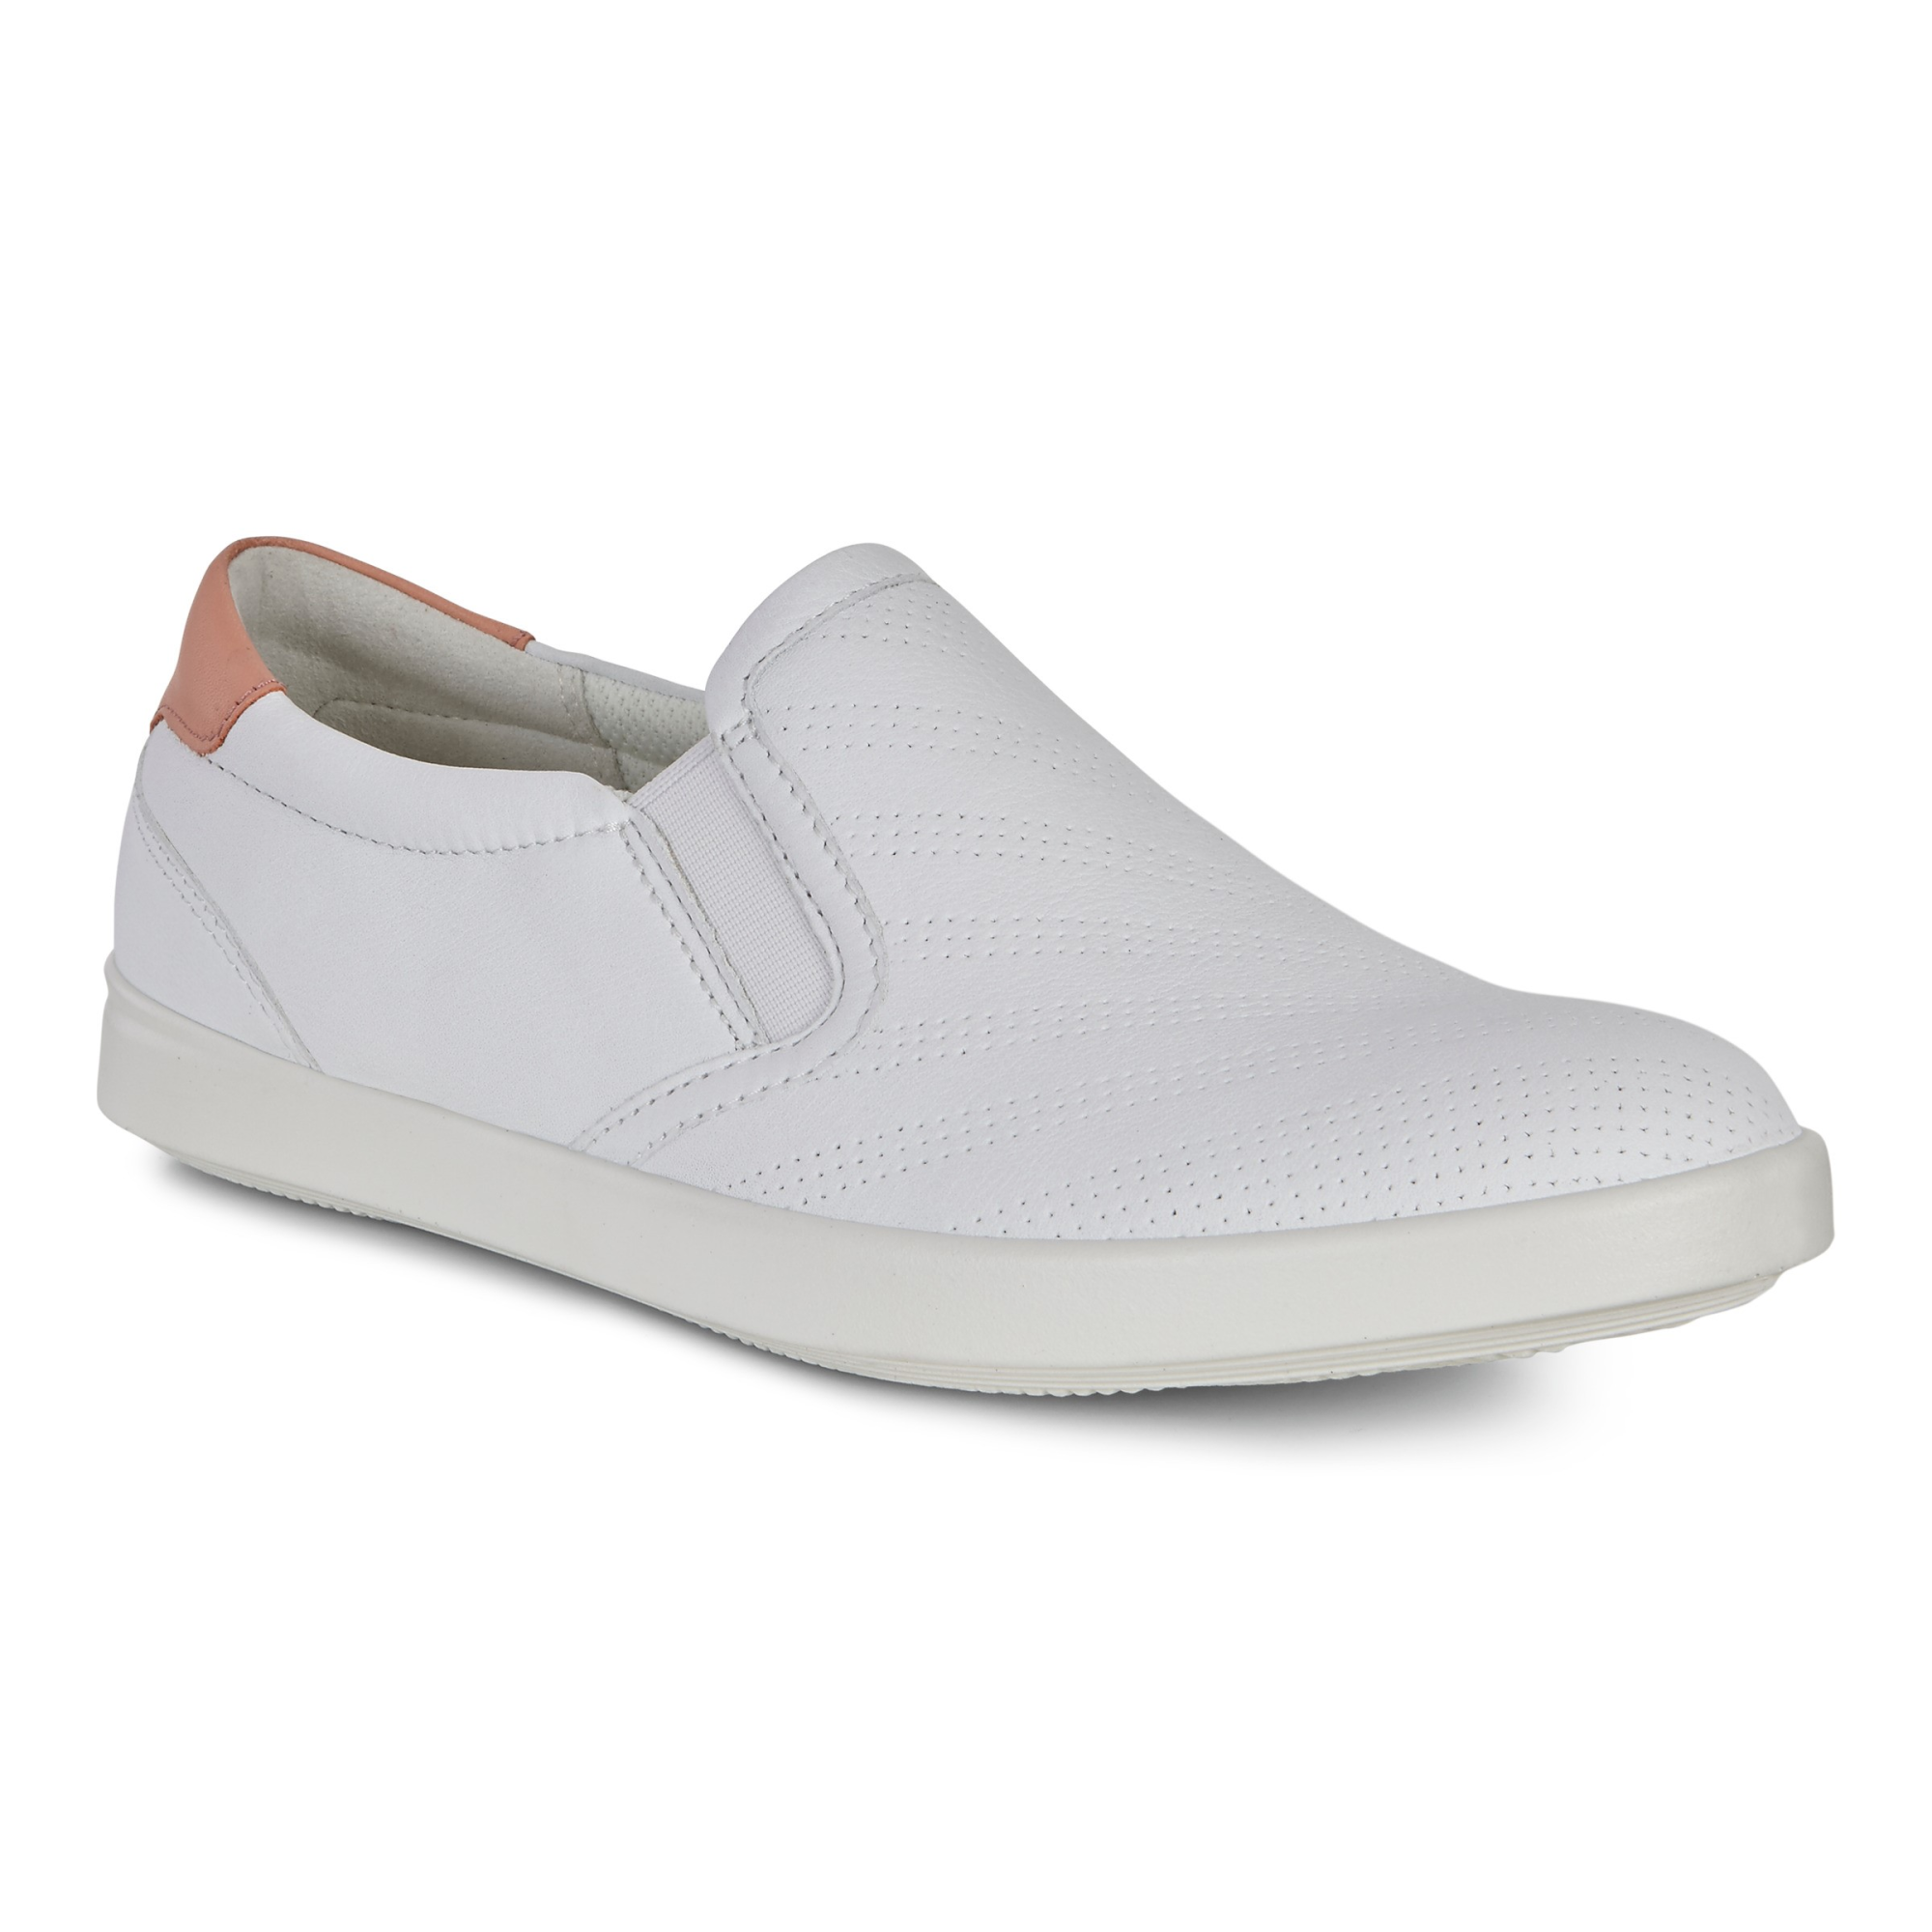 Himmel belønning bus Ecco Aimee Sport Slip On 43 - Products - Veryk Mall - Veryk Mall, many  product, quick response, safe your money!